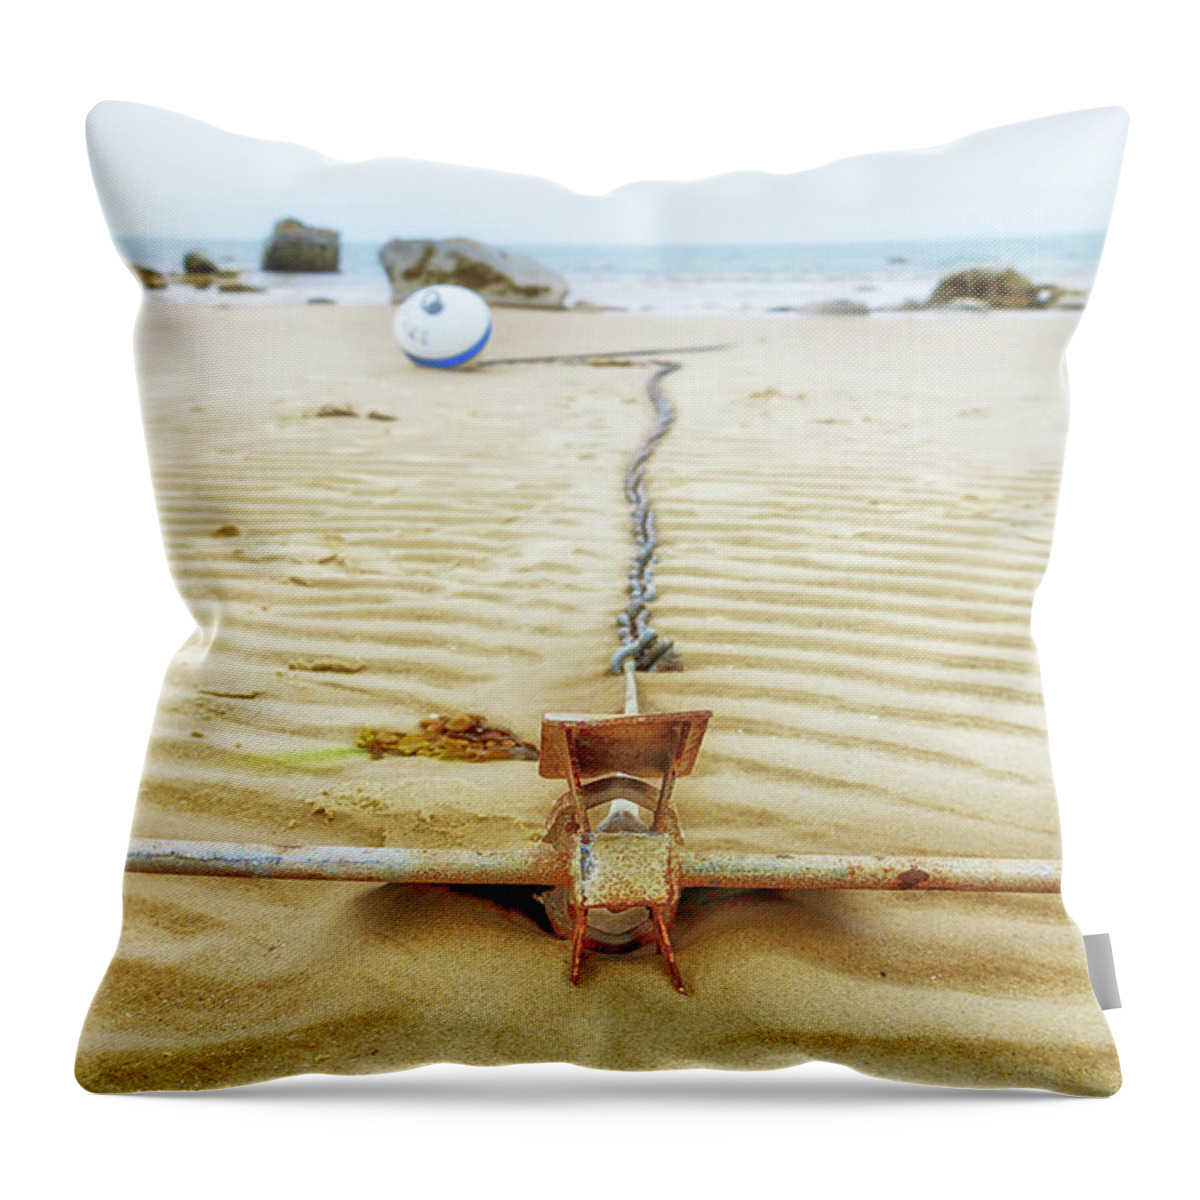 Harborview Beach Throw Pillow featuring the photograph Harborview Beach Anchor by Marisa Geraghty Photography